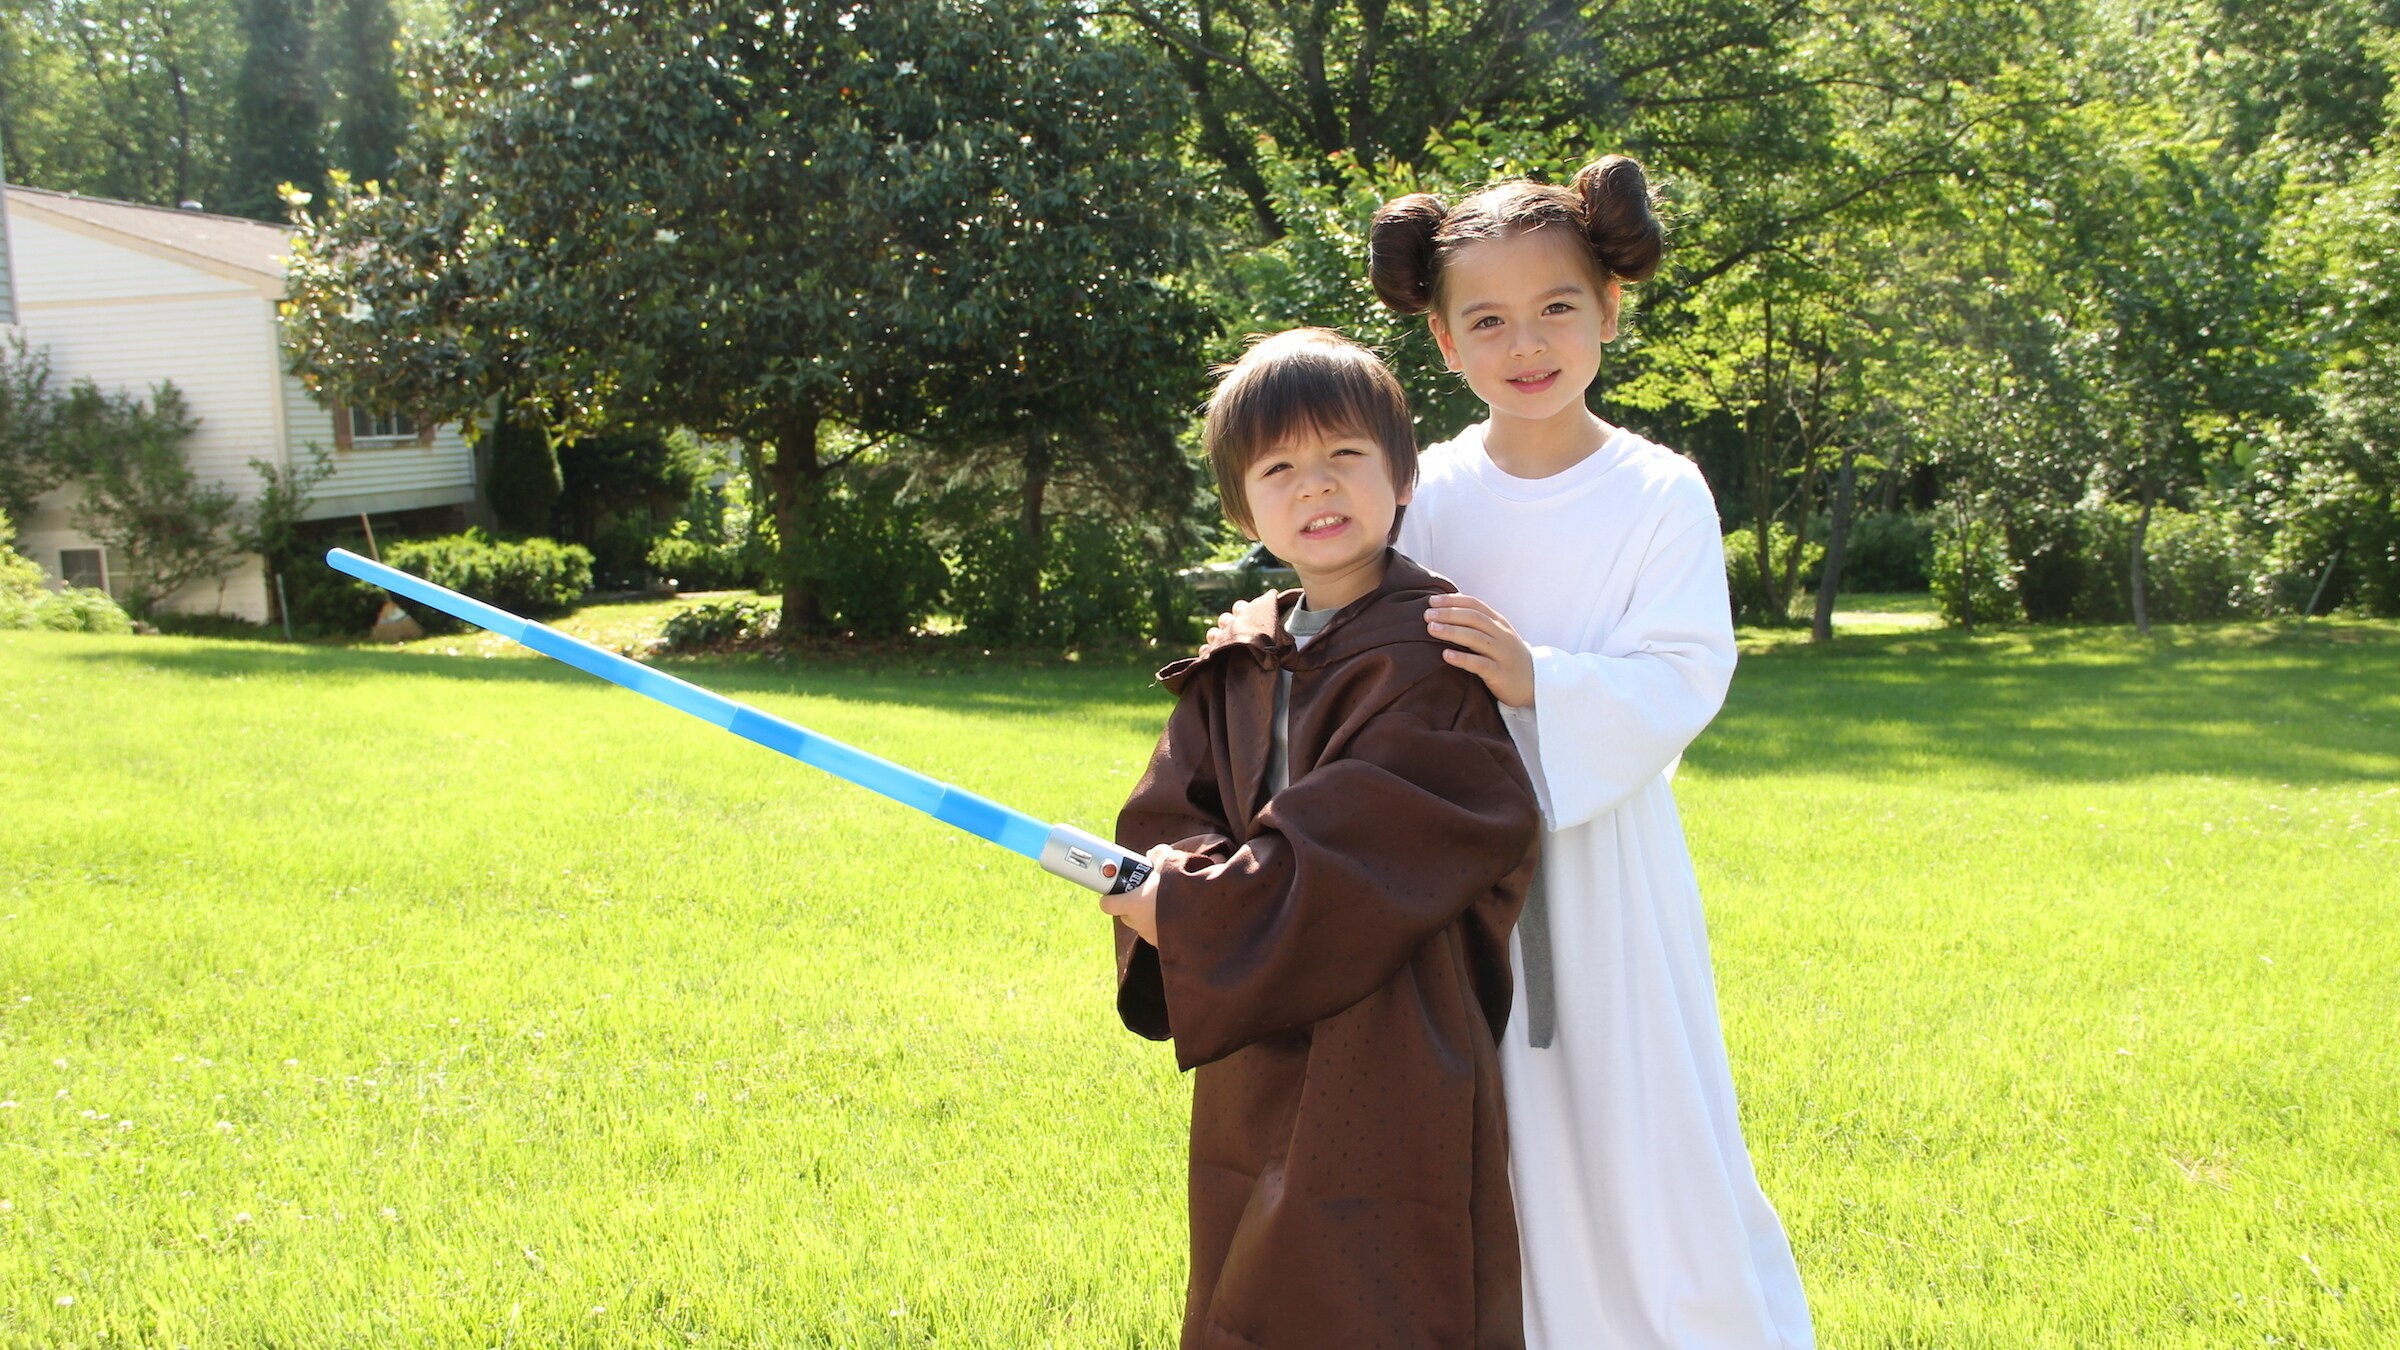 Parenting Padawans: What If Your Kids Just Don't Like Star Wars?